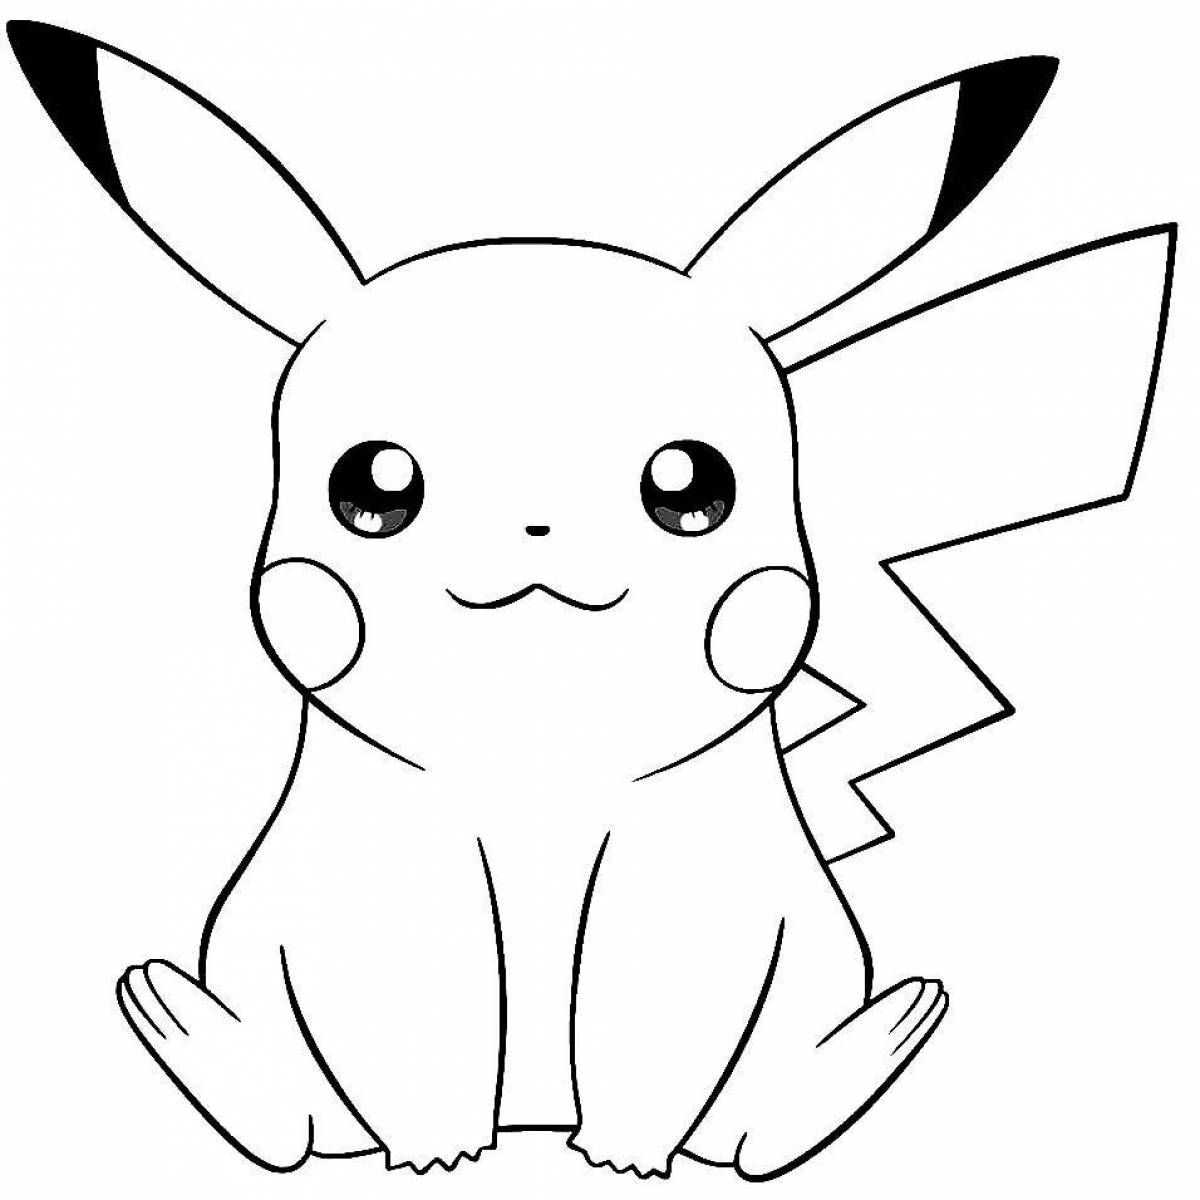 Glittering Pikachu coloring page